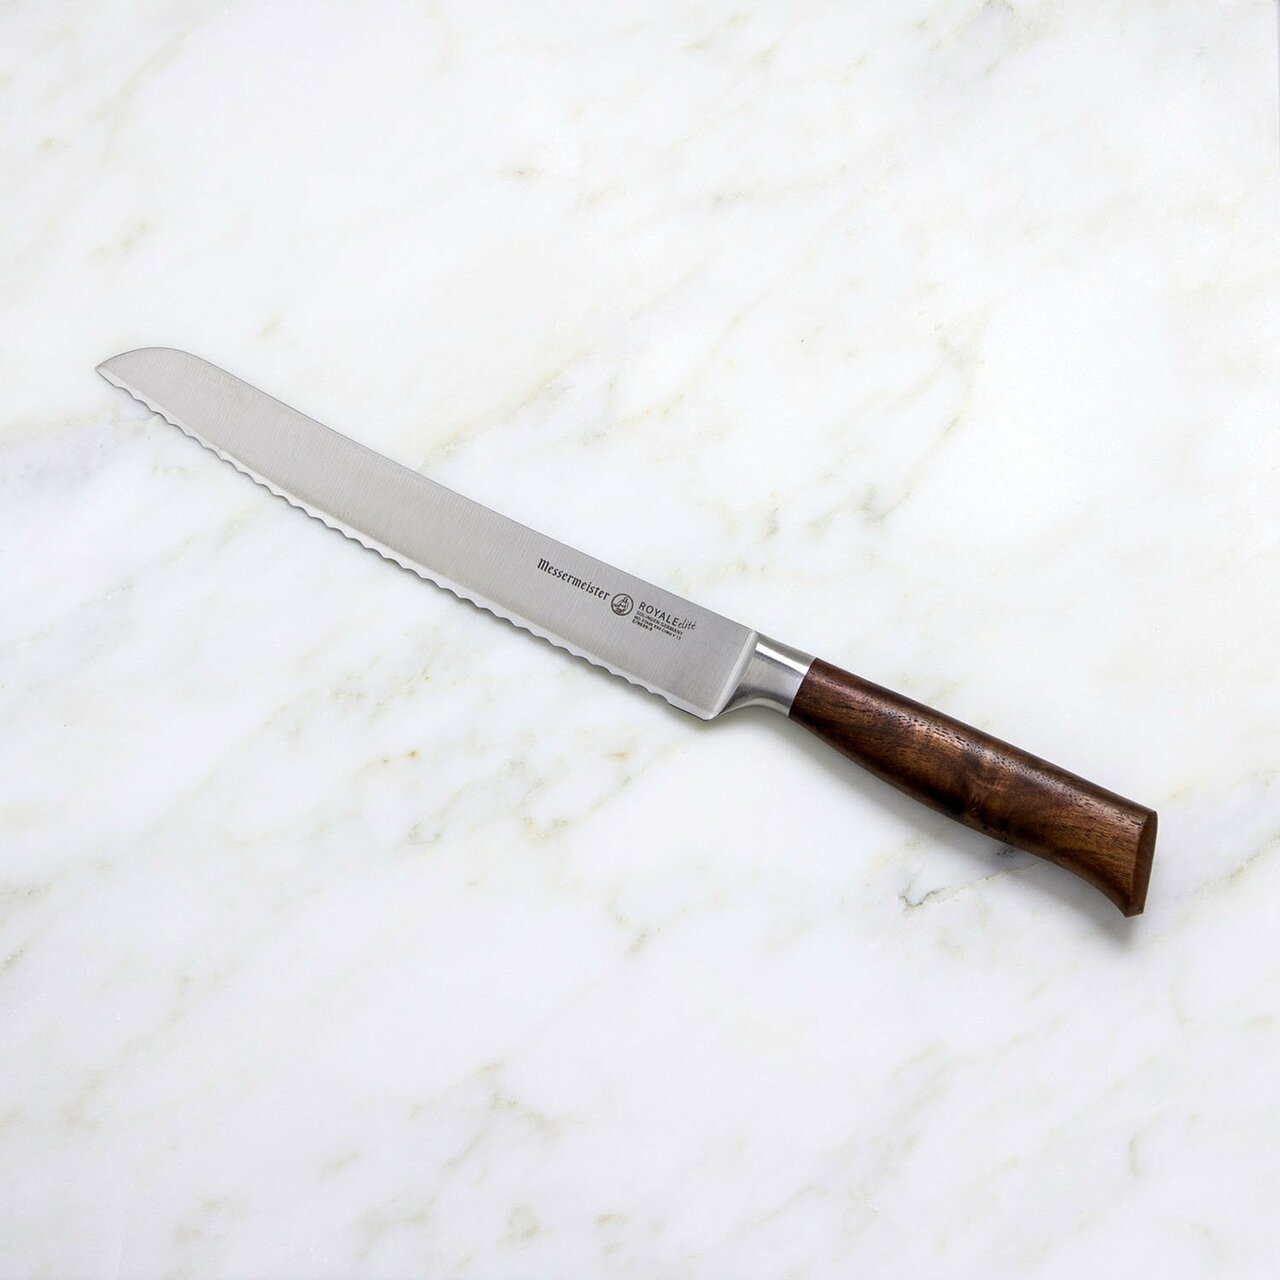 BEON.COM.AU E9699 9         Royal Elite Scalloped Bread Knife 9 Inch The scalloped edge of the Messermeister Royale Elité 9 Inch Bread Knife bites into the crust of bread. This allows for smooth slicing with effortless pressure to avoid compressing your slice.  This knife is also used to slice through soft-s... Messermeister at BEON.COM.AU